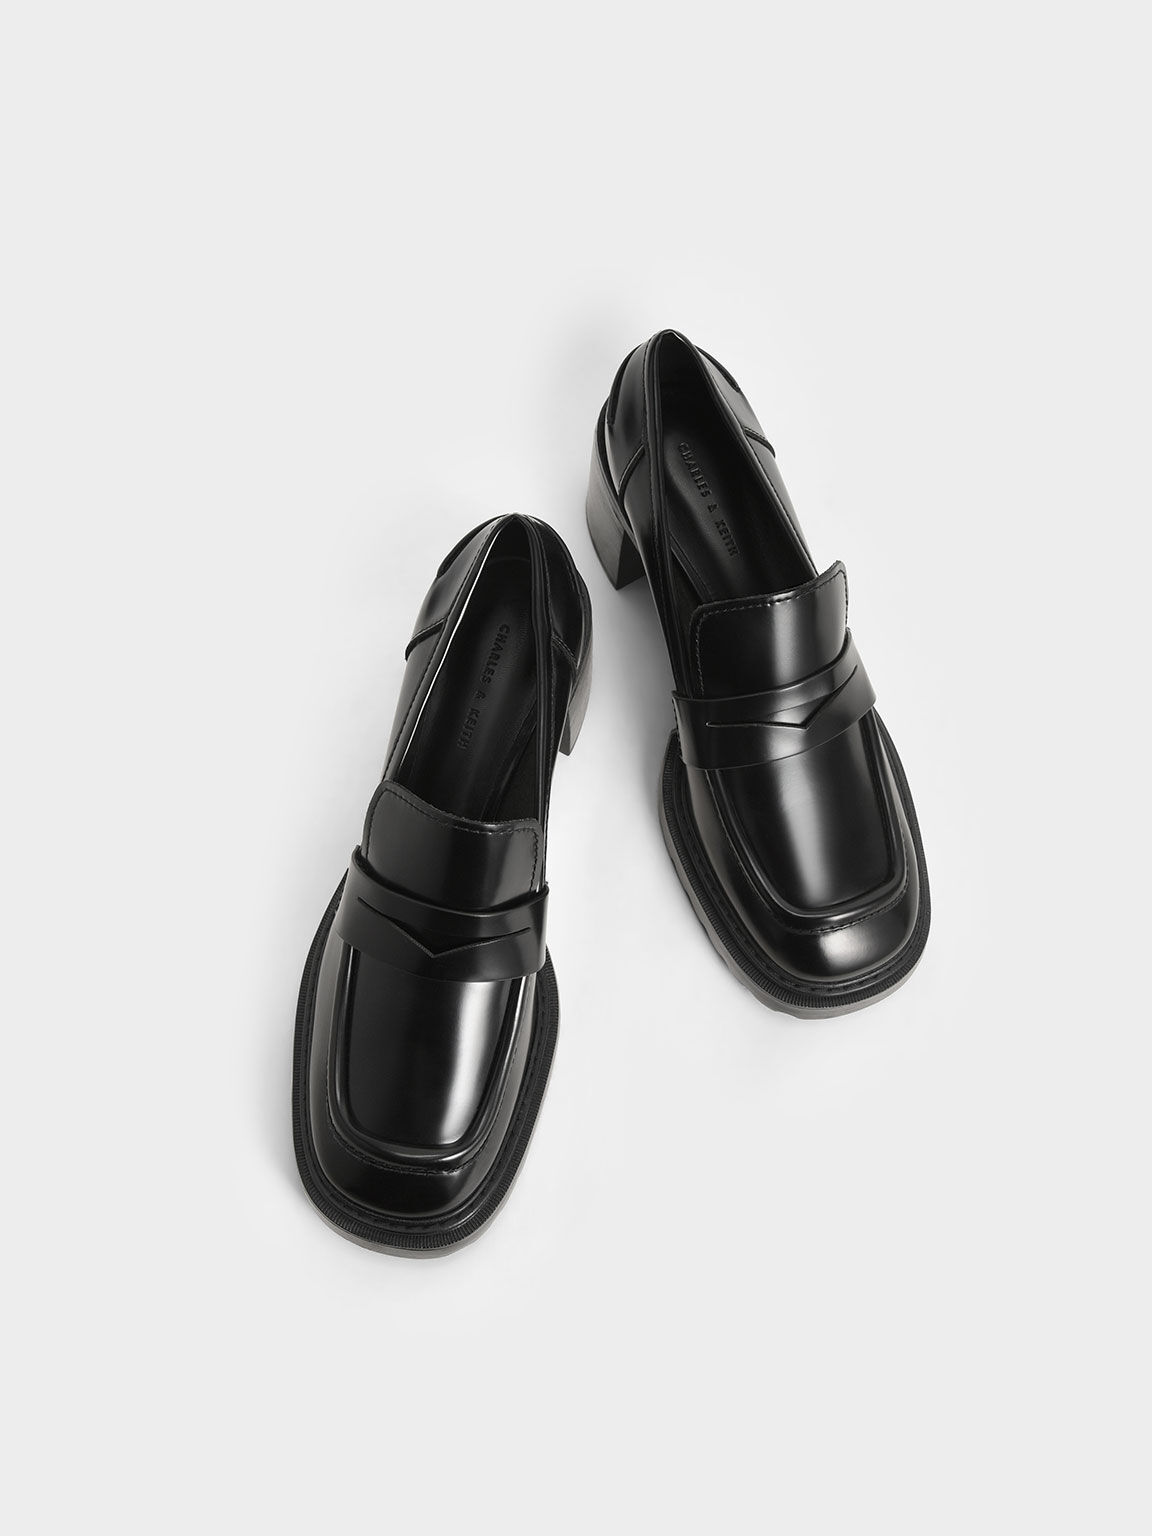 Black Penny Loafer Pumps - CHARLES & KEITH US